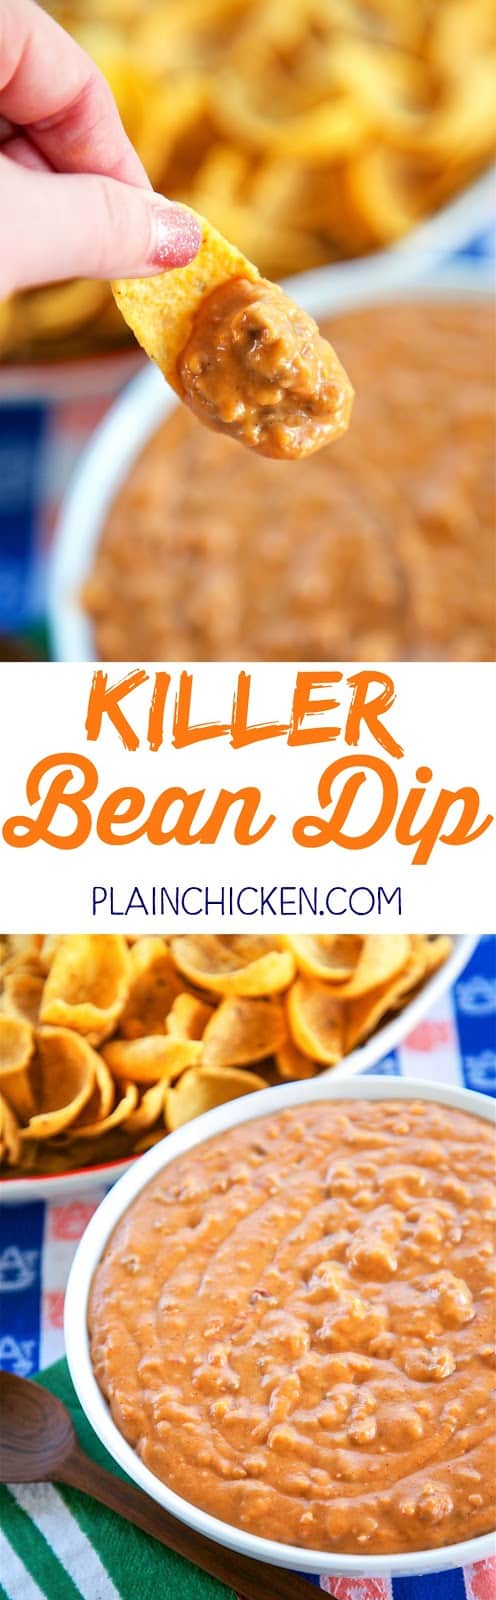 Killer Bean Dip - only 5 ingredients! Refried beans, hamburger, taco seasoning, salsa and Velveeta. Can make on the stove or in the slow cooker. This stuff is CRAZY good! Great for tailgating!! I could make a meal out of this dip. Great Mexican dip!!